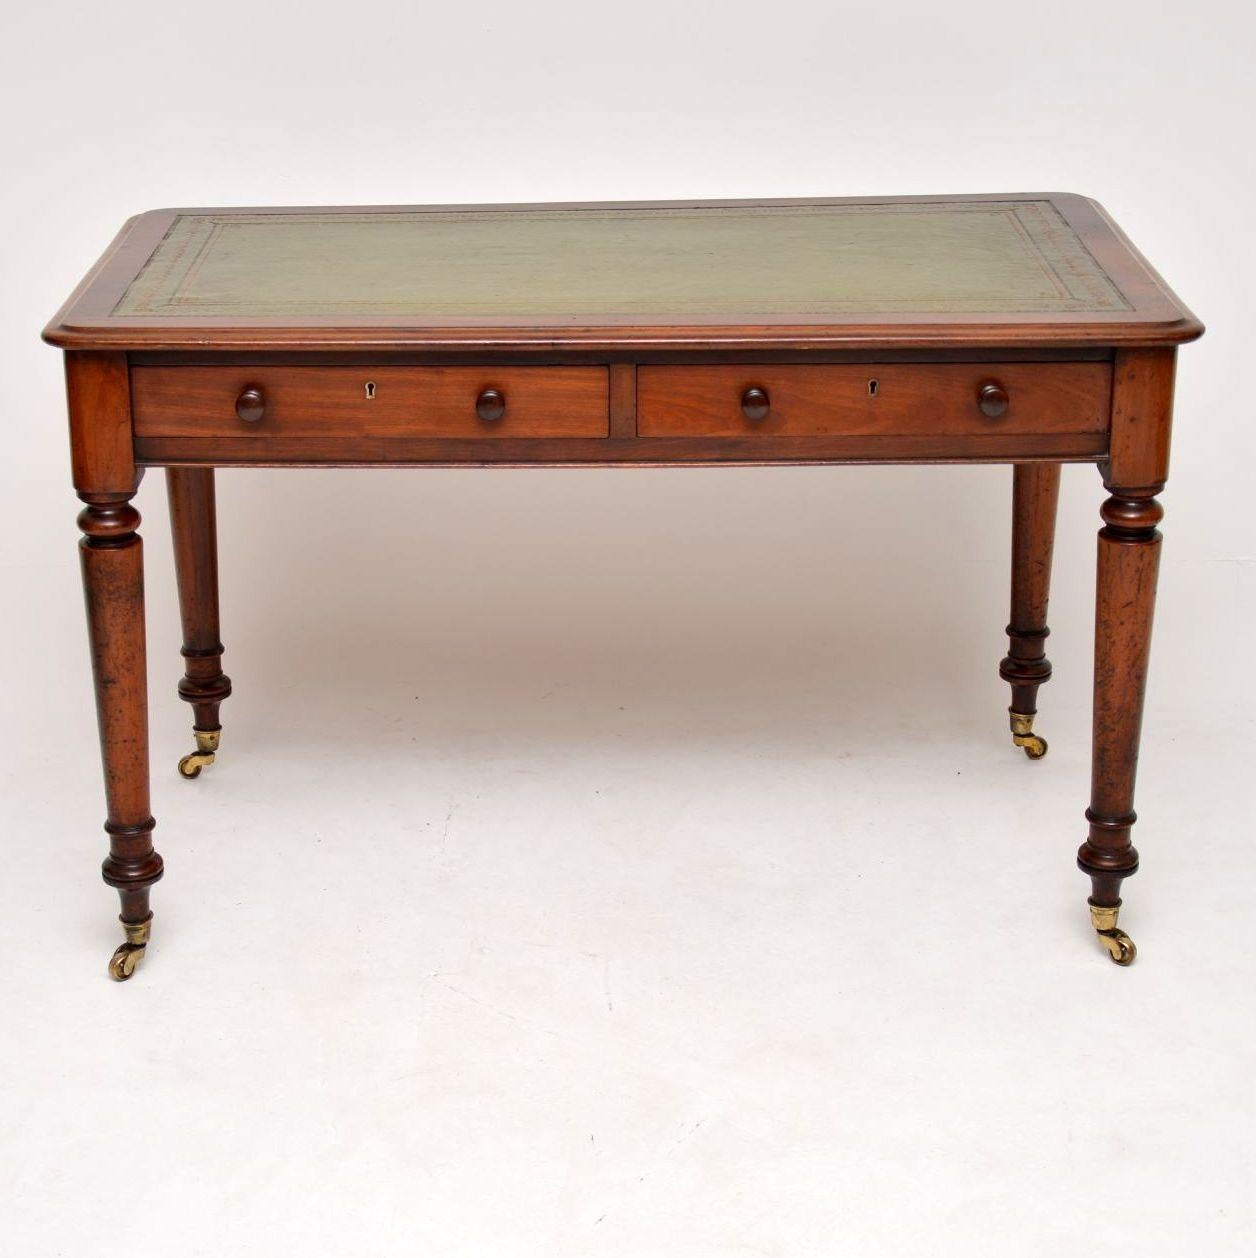 Antique early Victorian mahogany leather top writing table of slightly large proportions than the average one we get. It’s in good original condition and also has lots of character. This desk is polished on the back and has a tooled leather writing